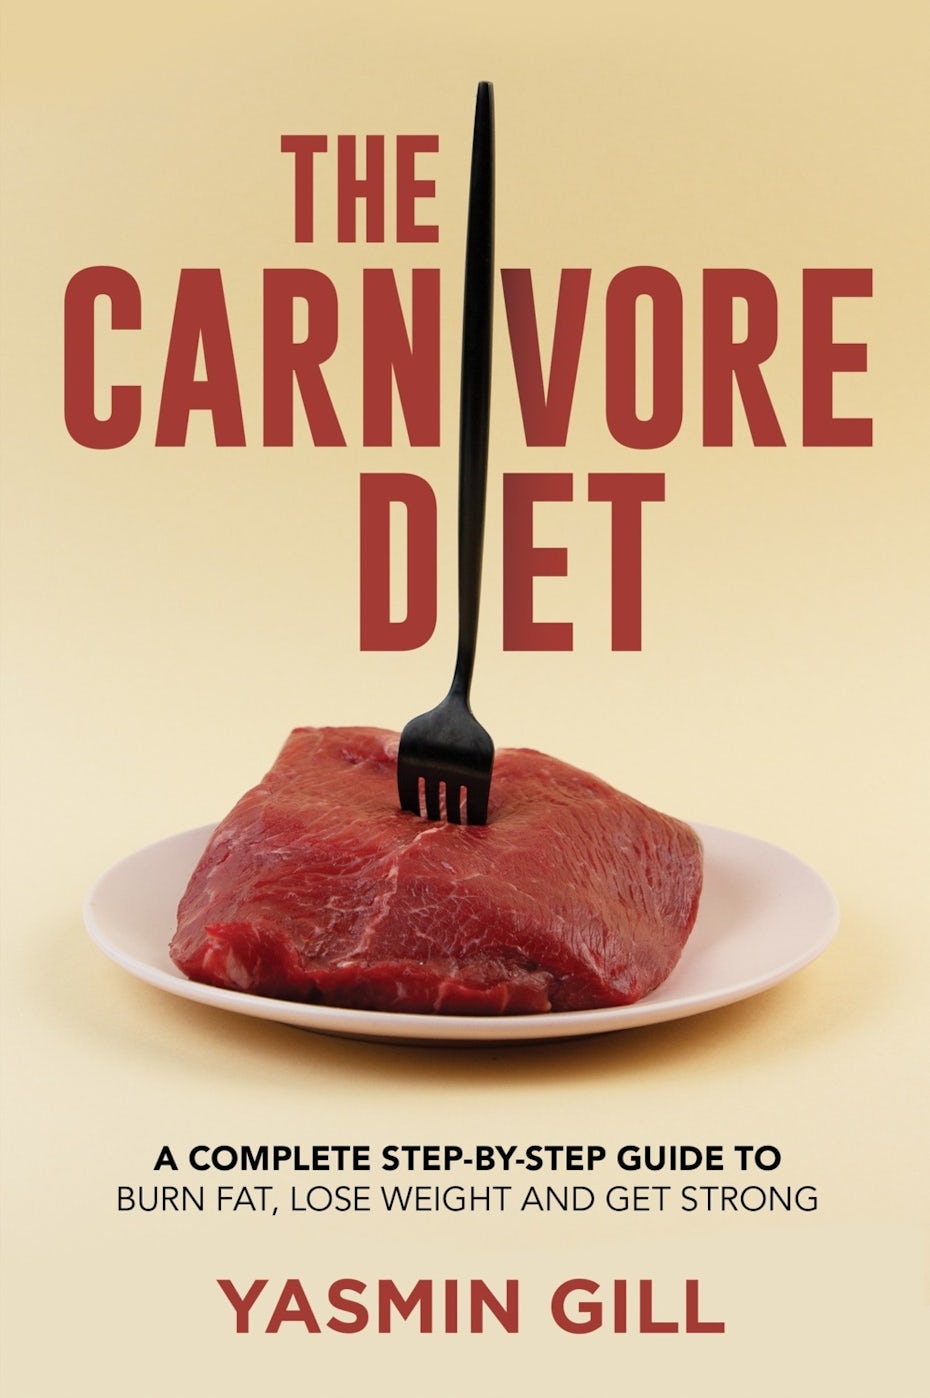 book cover trends example: tan book cover with red text and a steak with a long fork in it